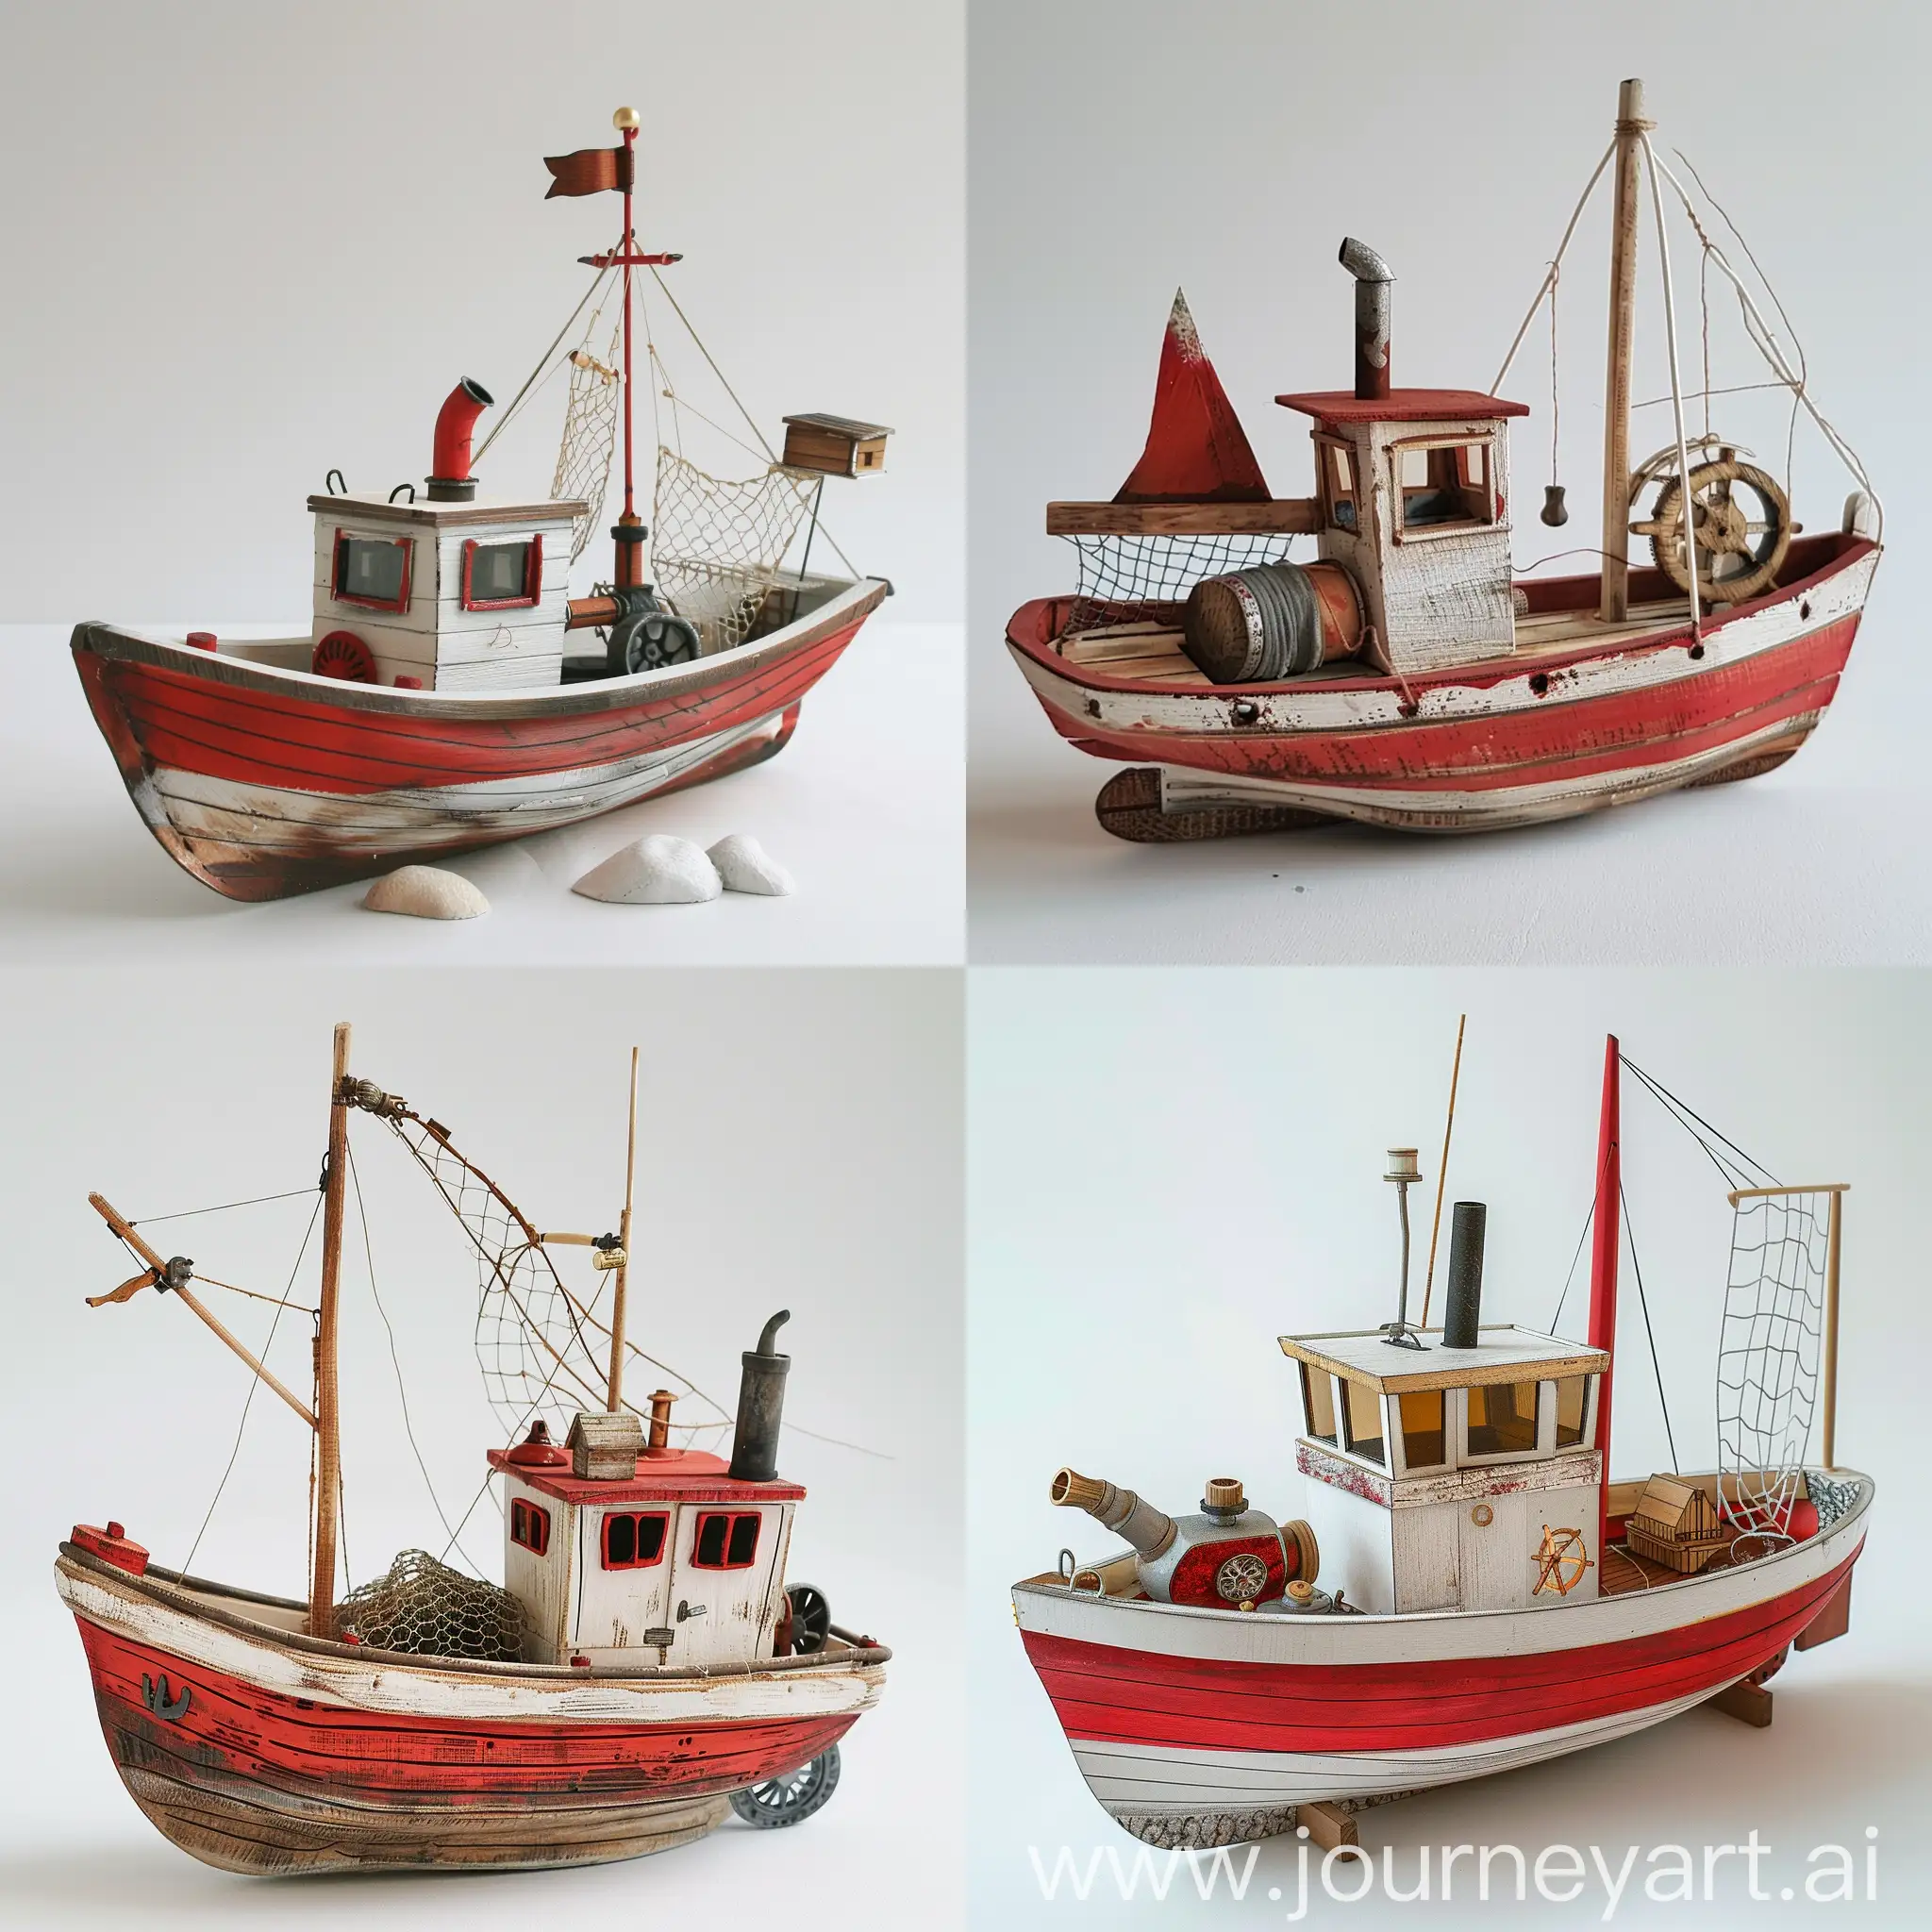 Charming-Red-and-White-Wooden-Fishing-Boat-with-Steam-Engine